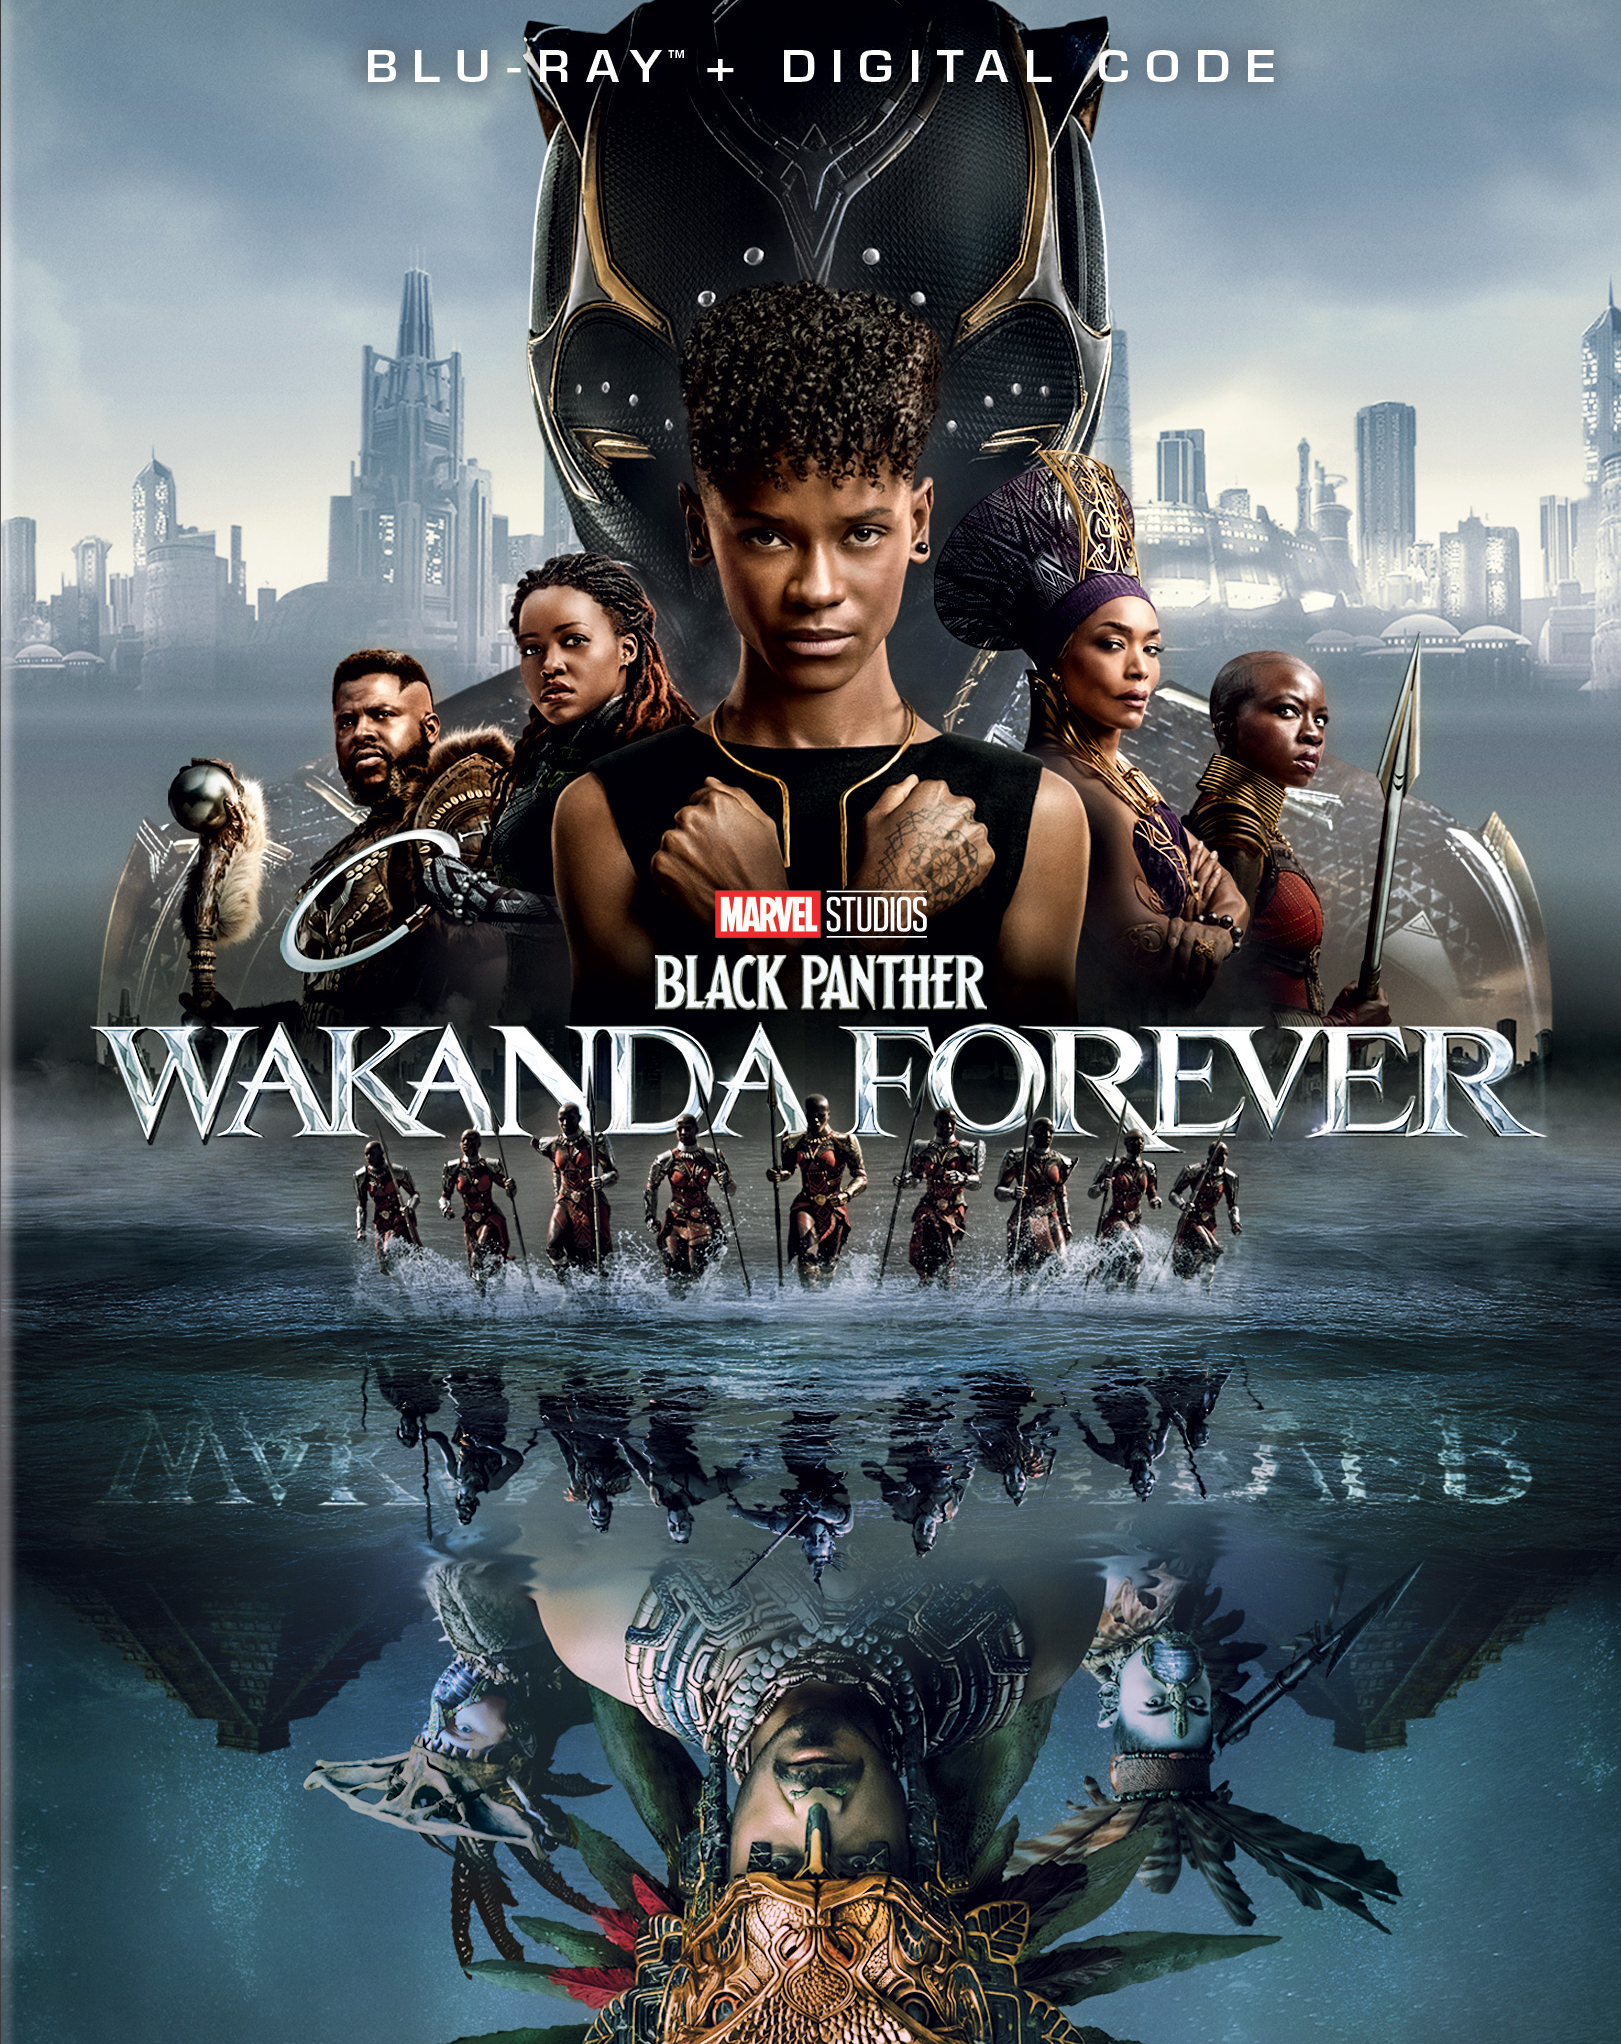 Black Panther: Wakanda Forever” Digital/4k/Blu-Ray/DVD Release Details  Announced – What's On Disney Plus